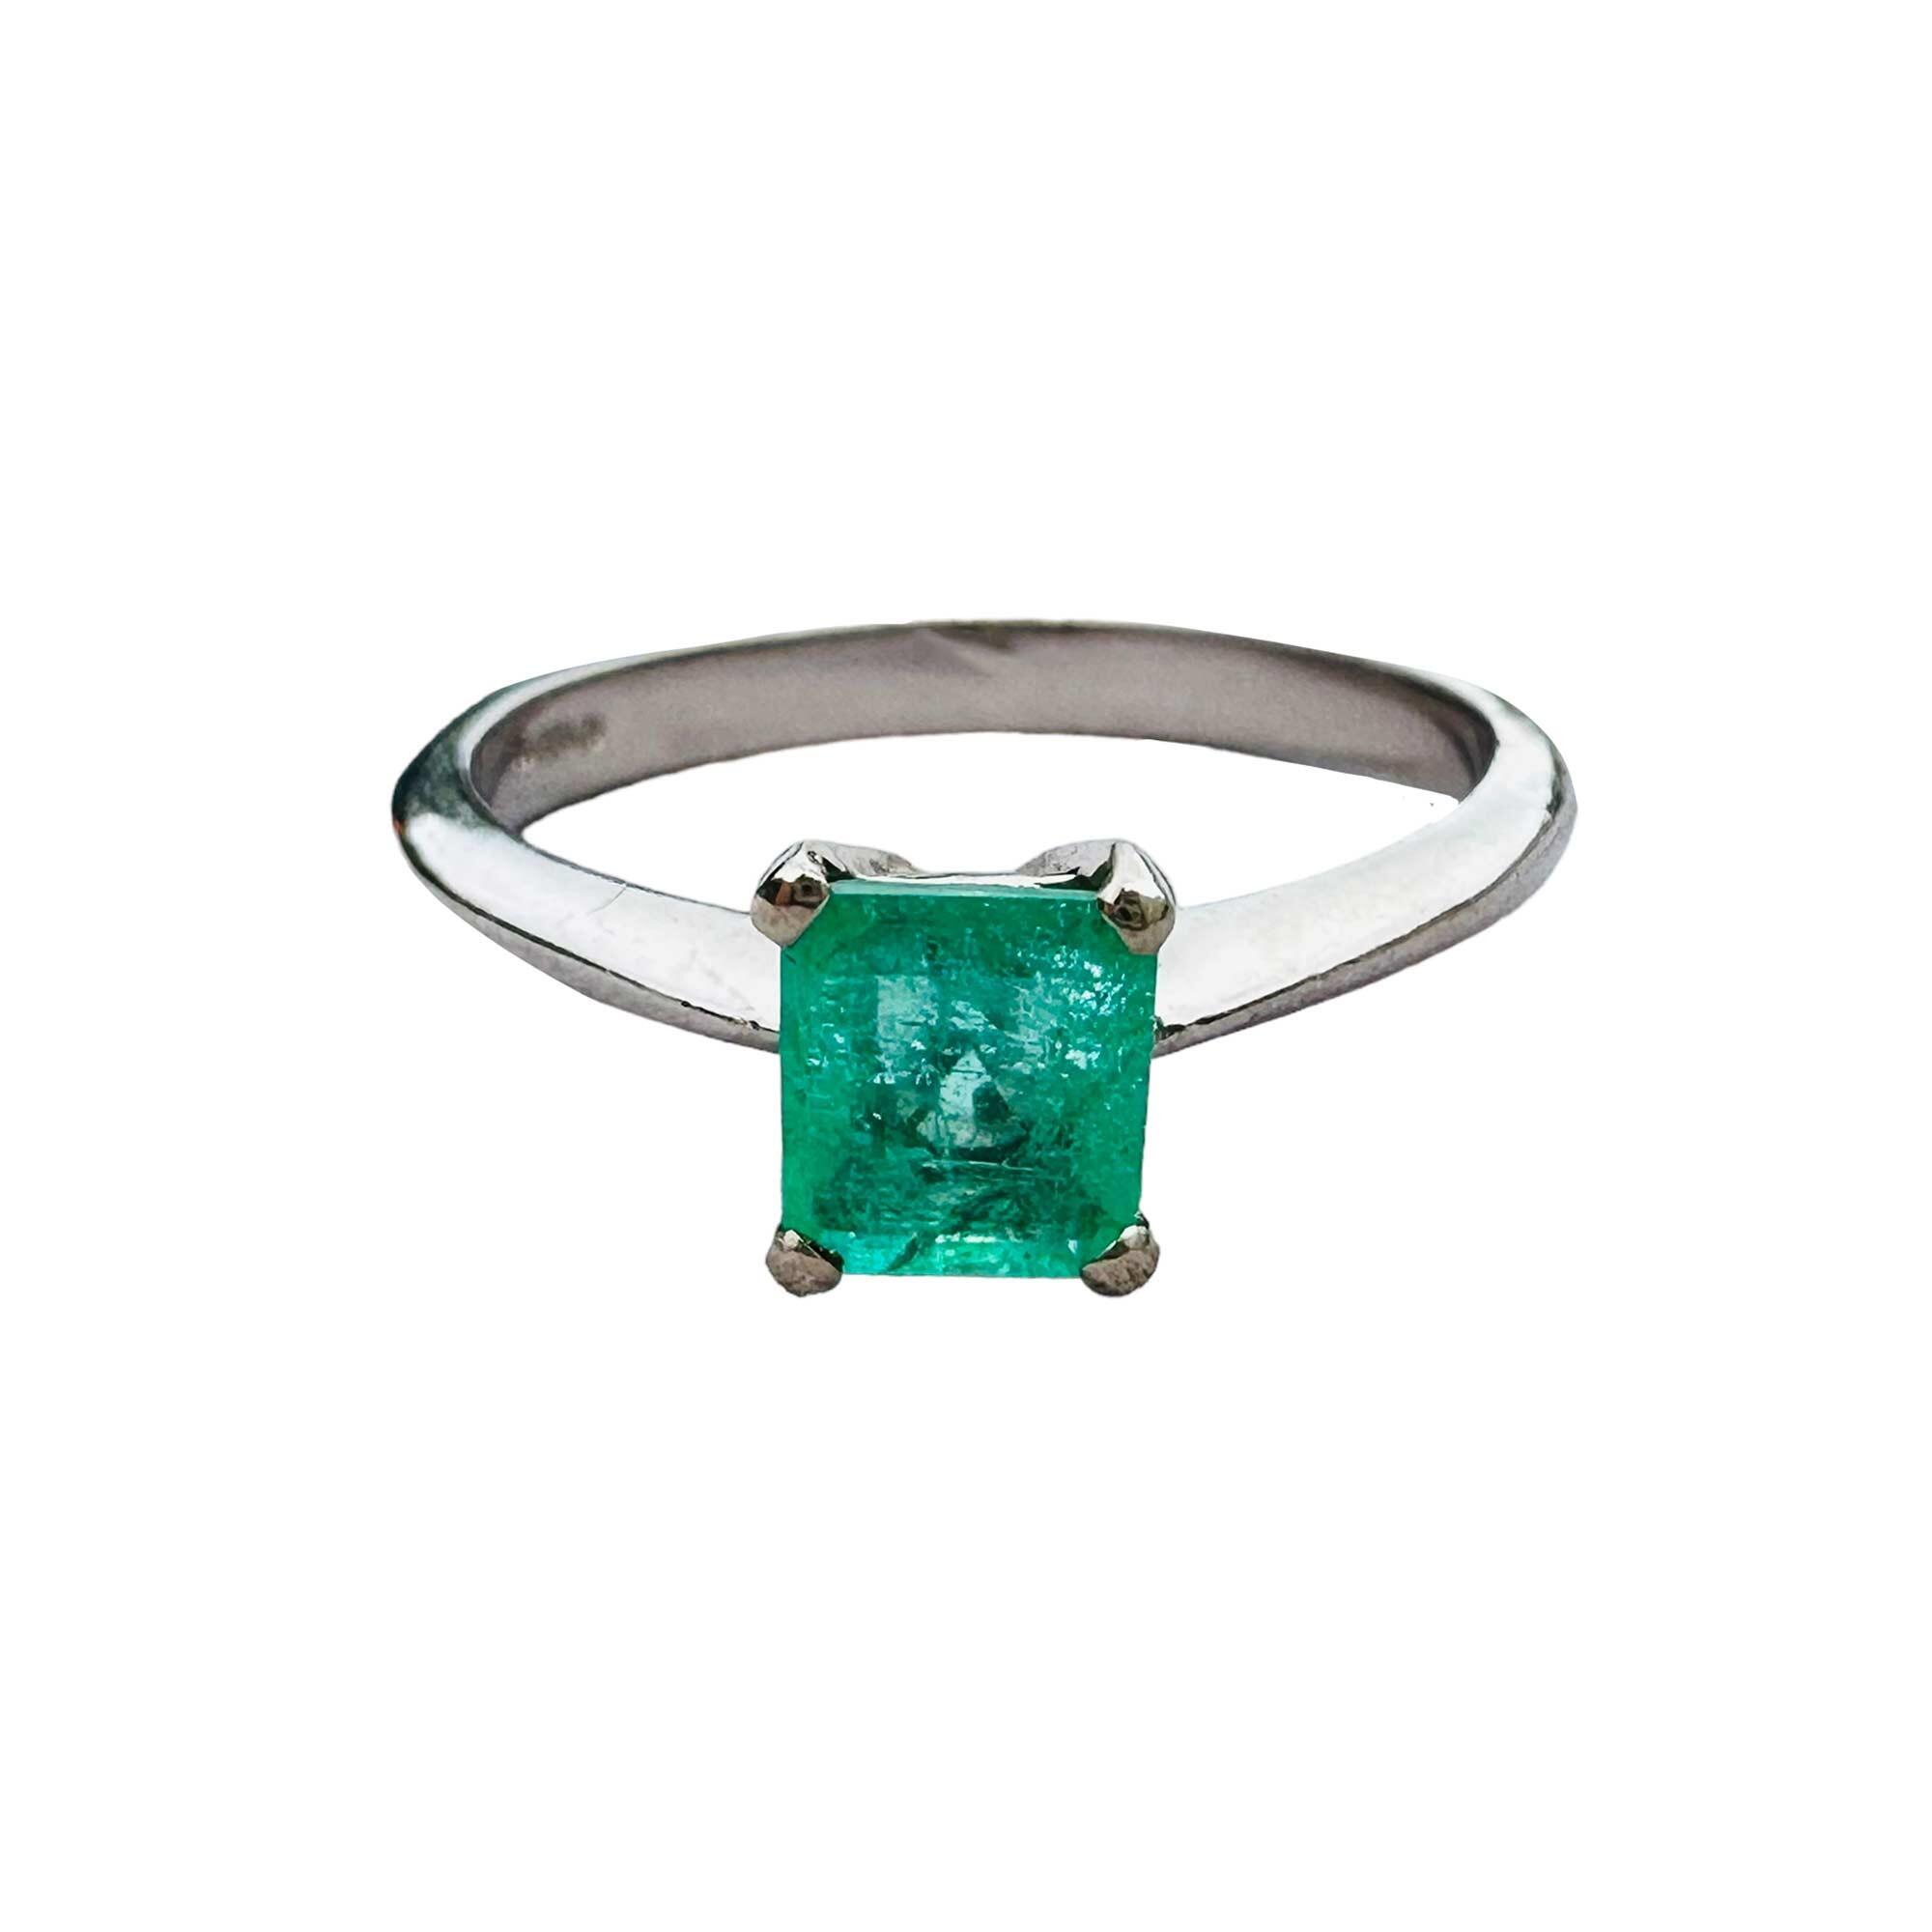 SOLD - Emerald solitaire ring